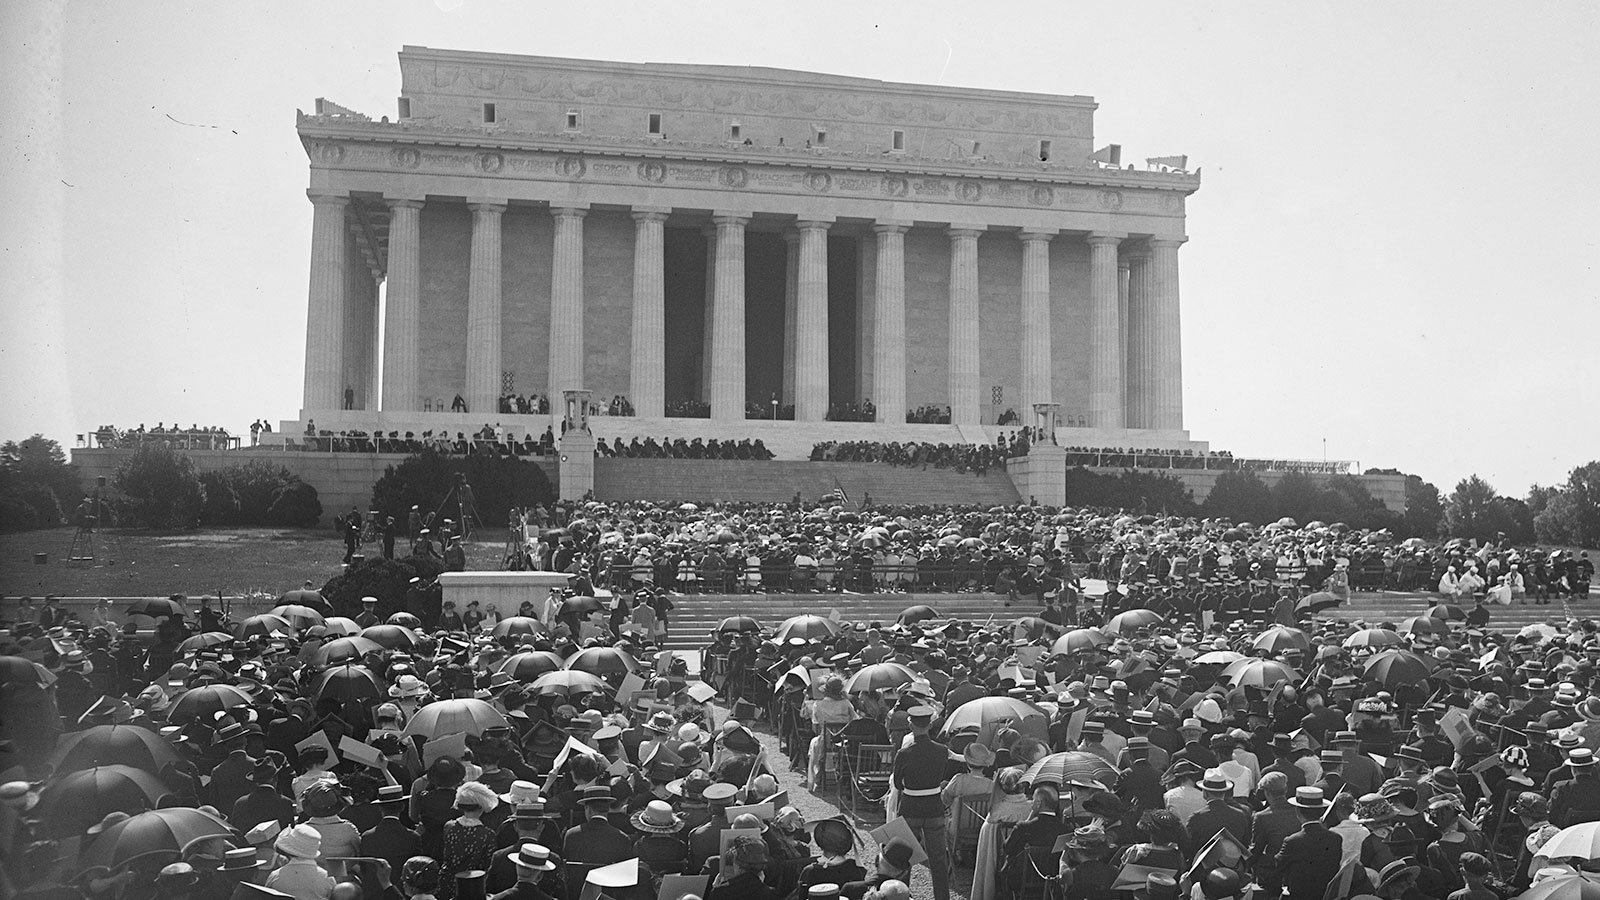 Dedication of the Lincoln Memorial on May 30, 1922